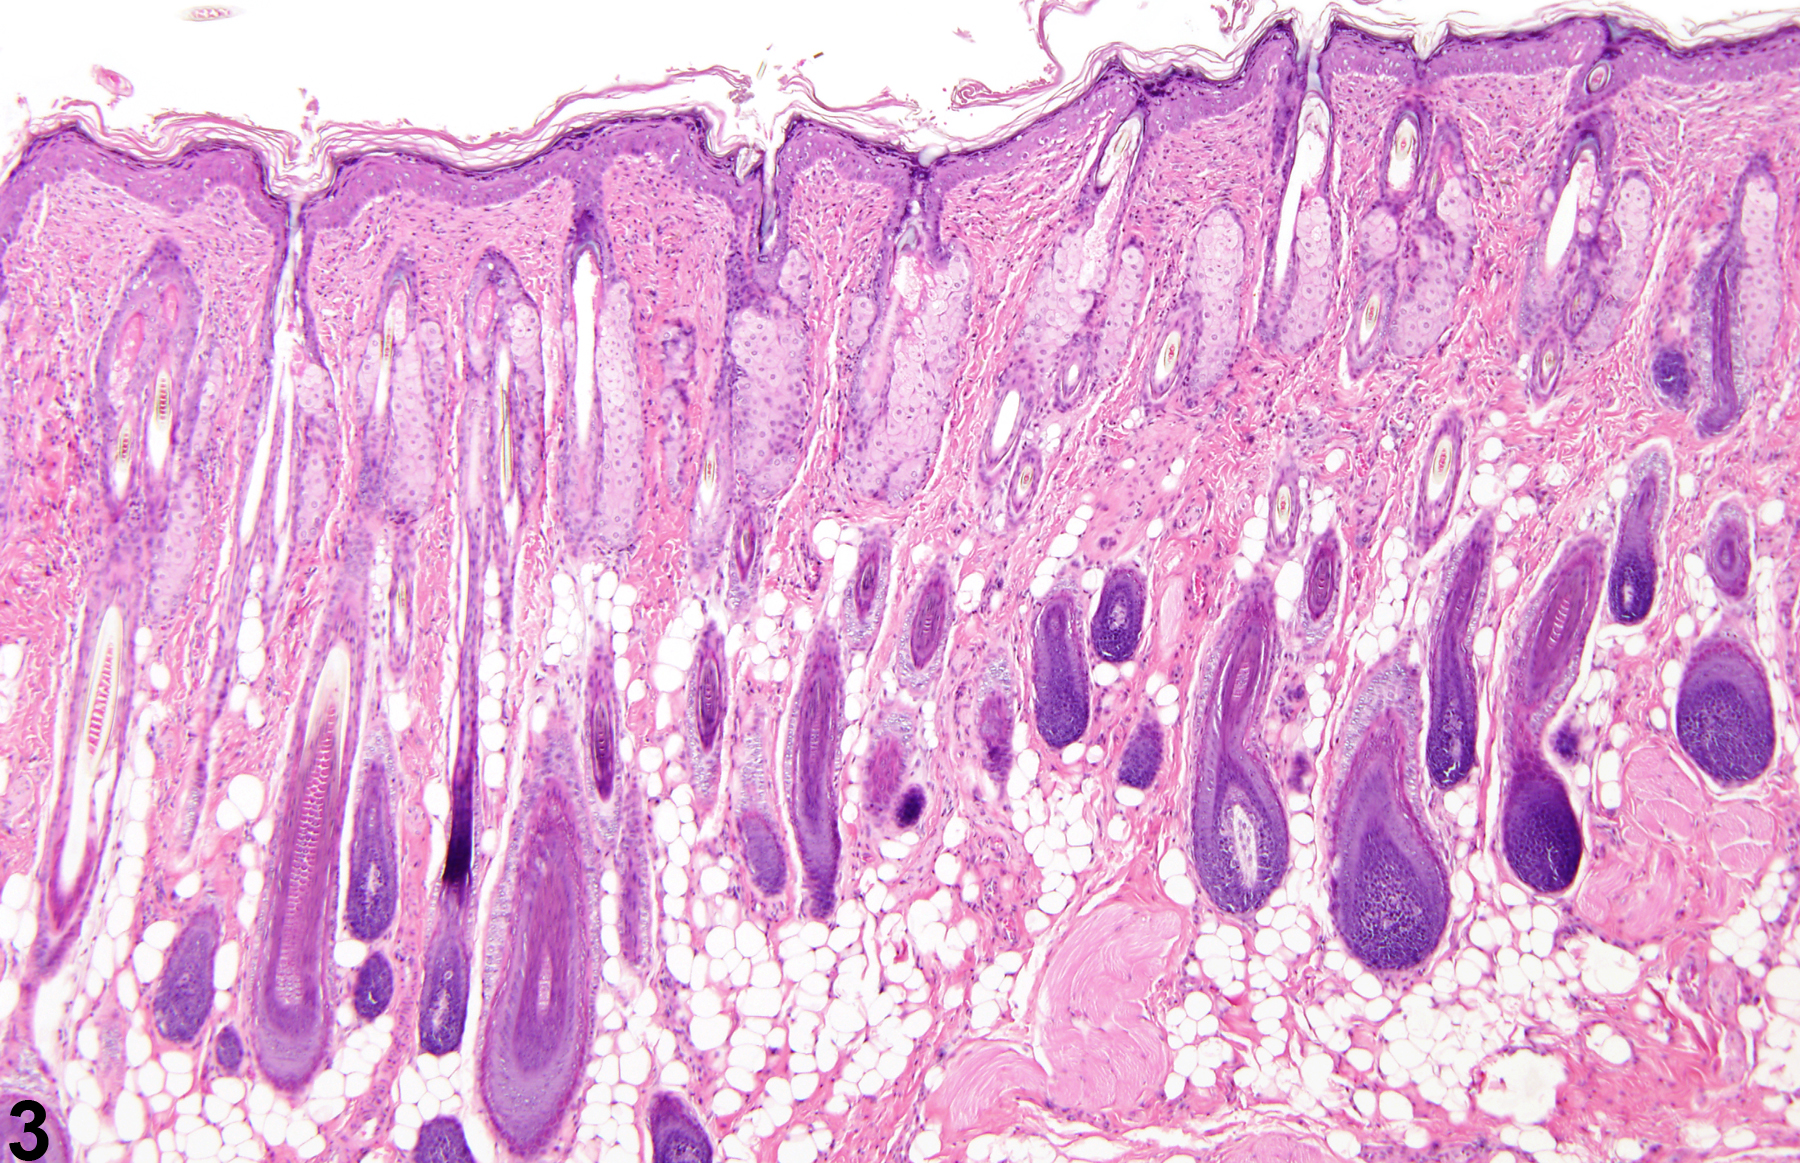 Image of Hyperplasia in the Skin from a Male F344/N Rat in a 90-day  Study